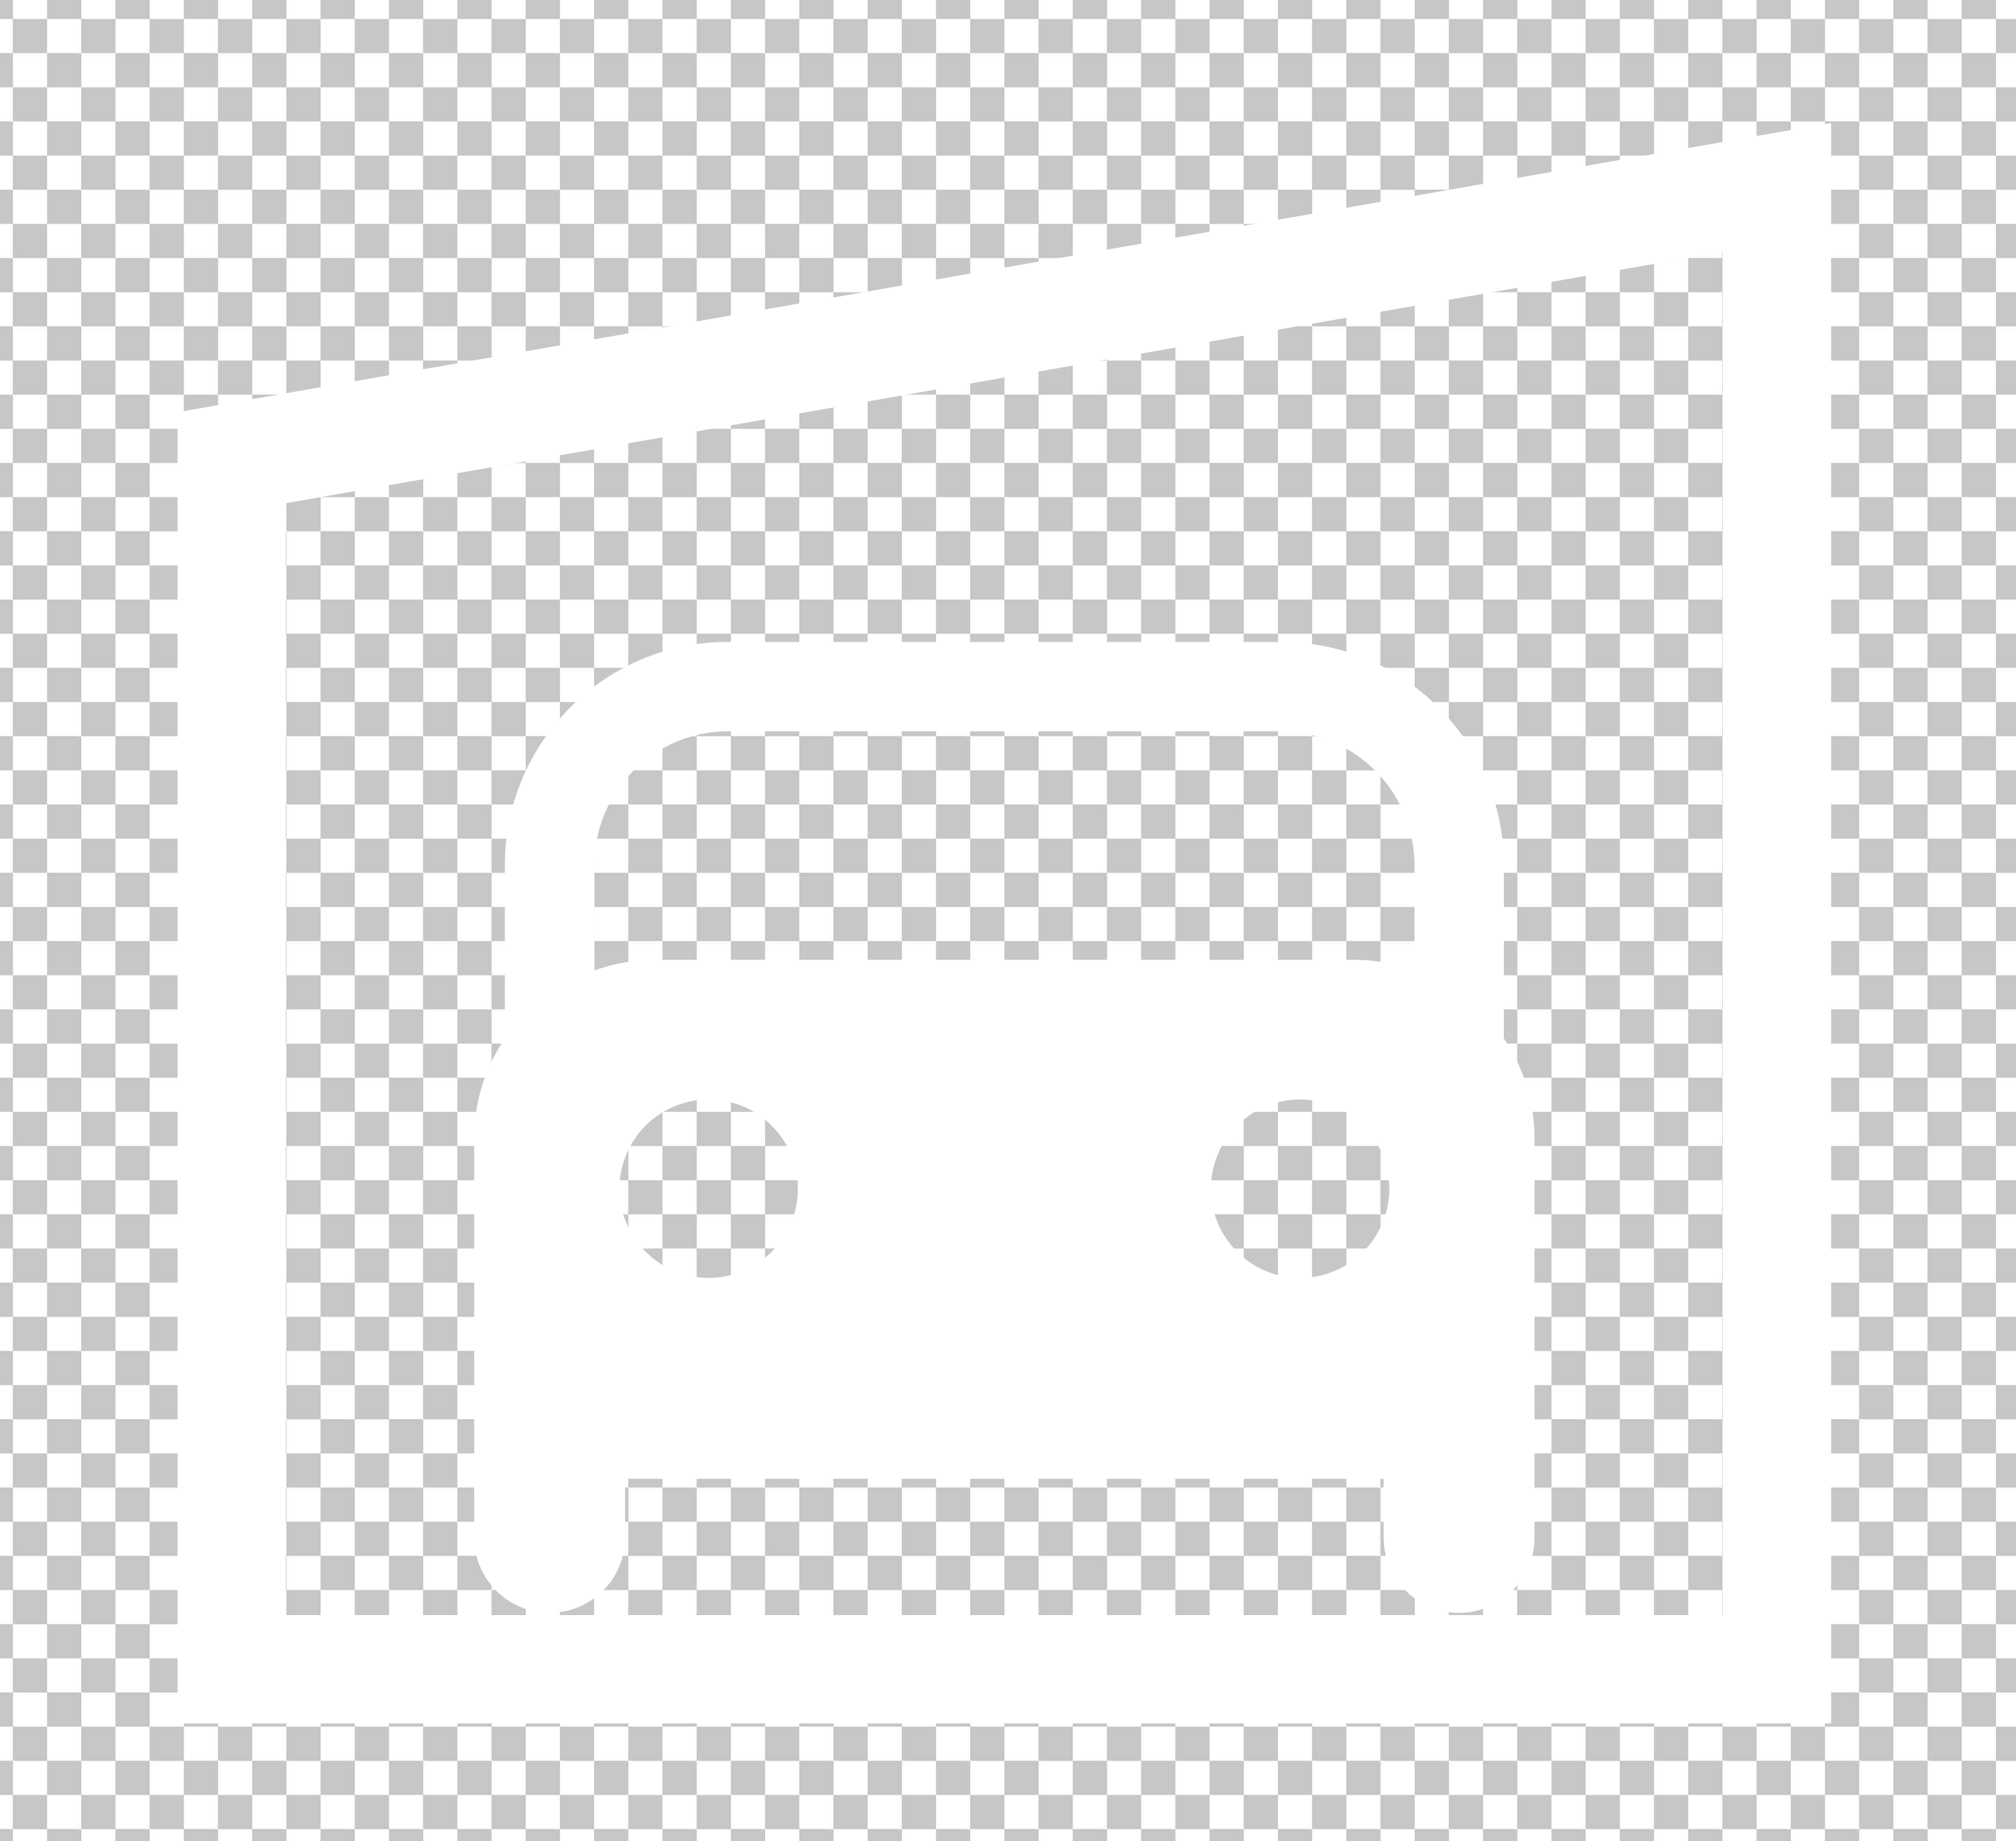 White Car Icon Parked in Garage PNG Image